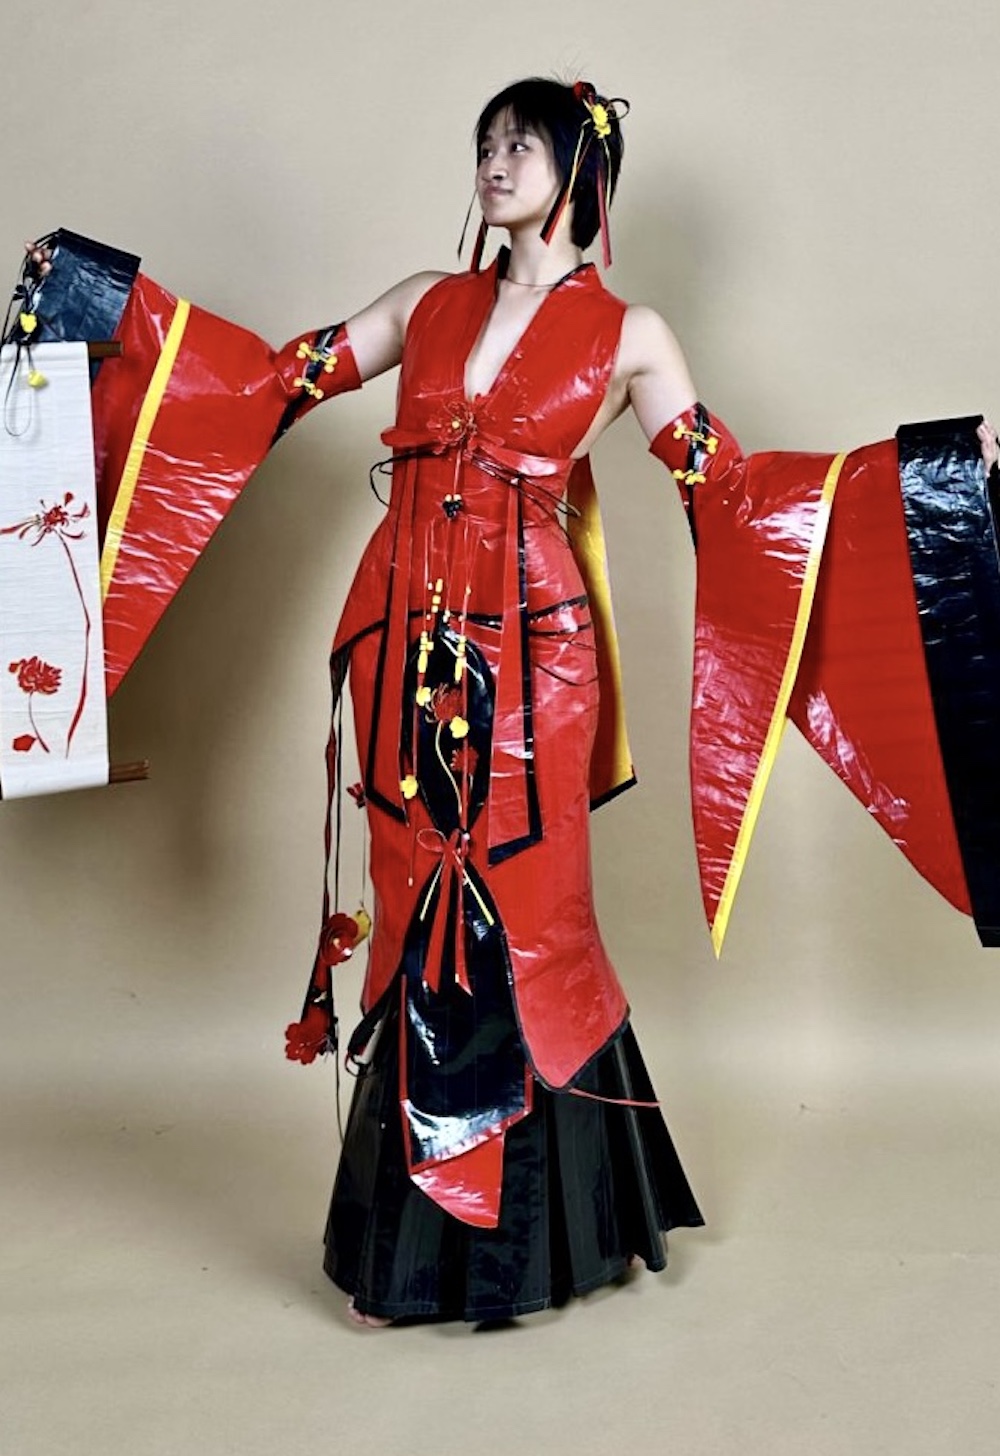 Japanese kimono inspired gown made of duct tape